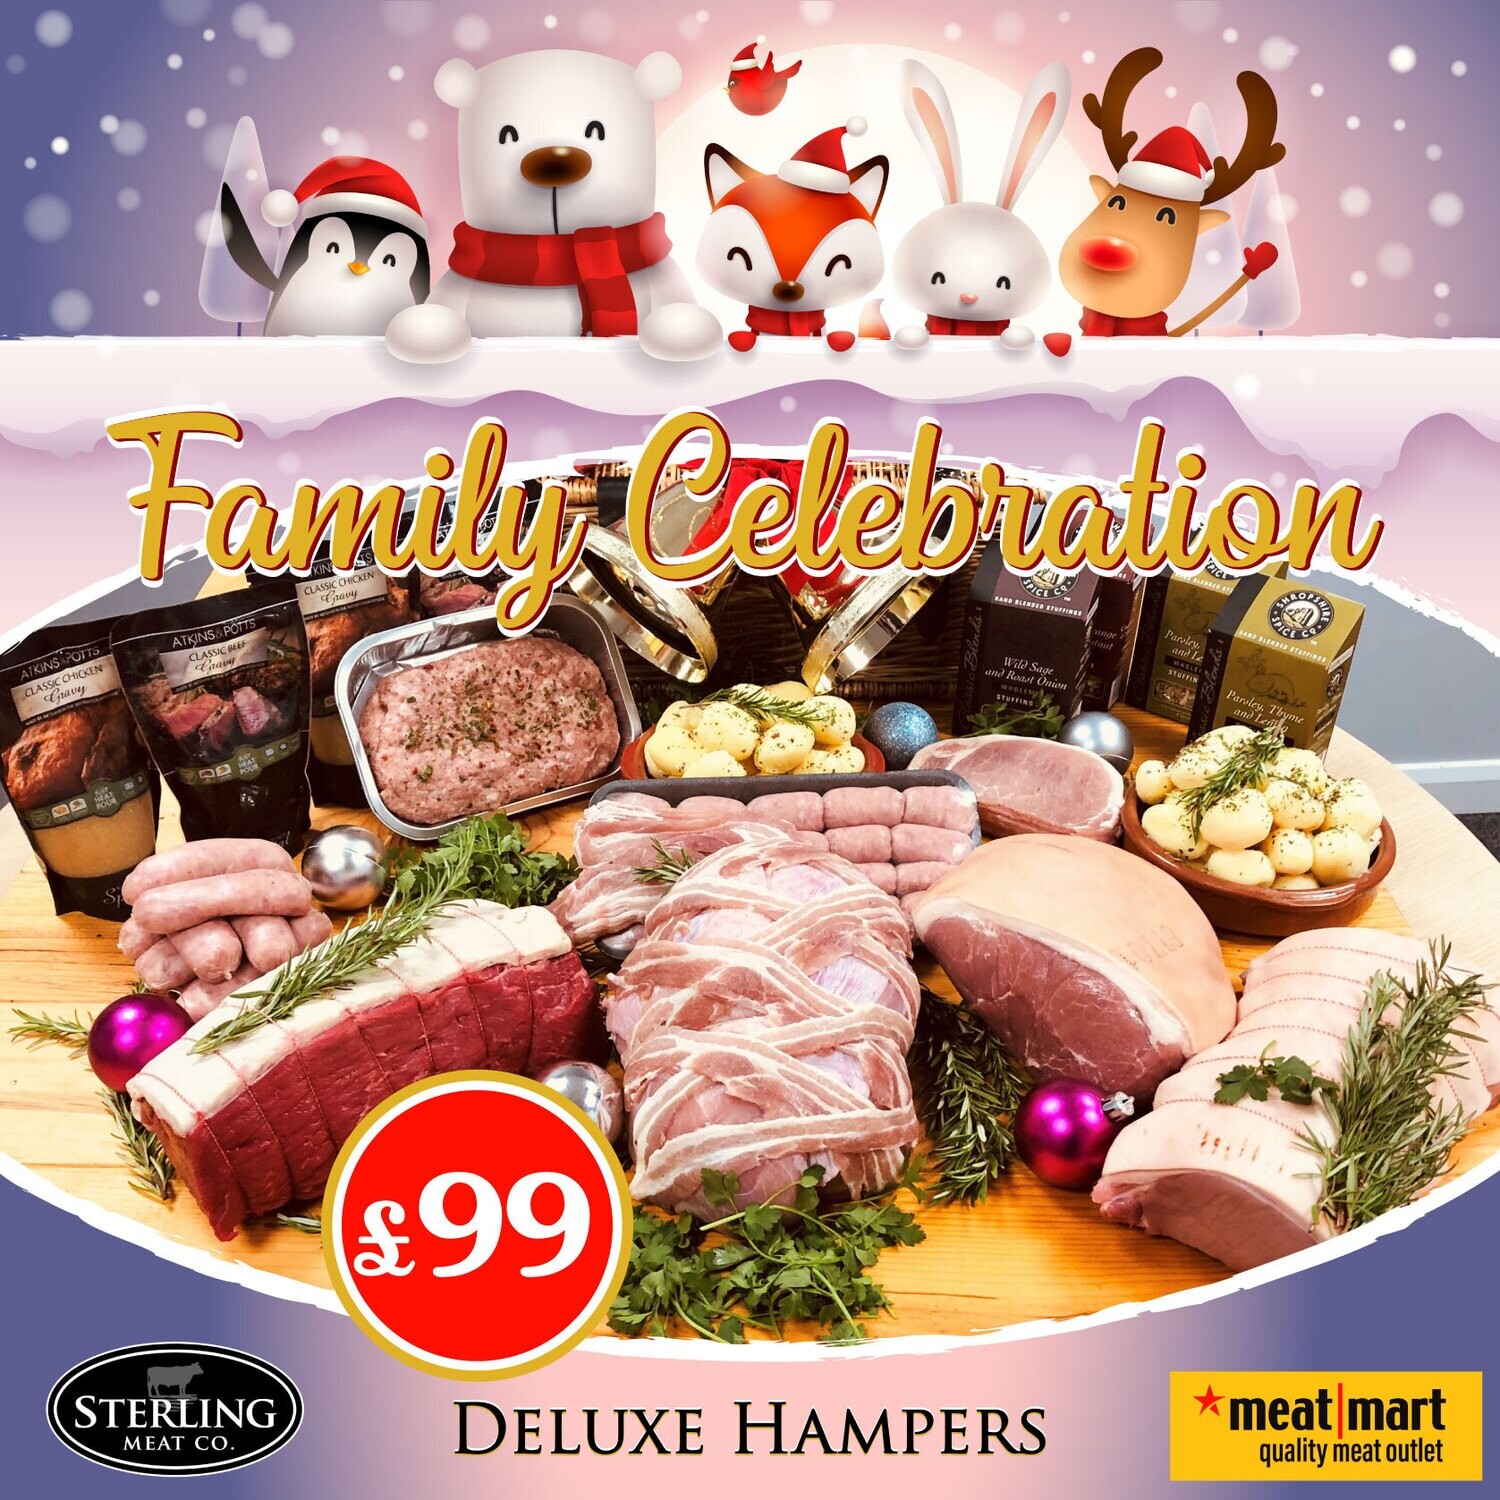 Family Celebration Deluxe Hamper £99 - PRE-ORDER BY THE 16TH OF DEC